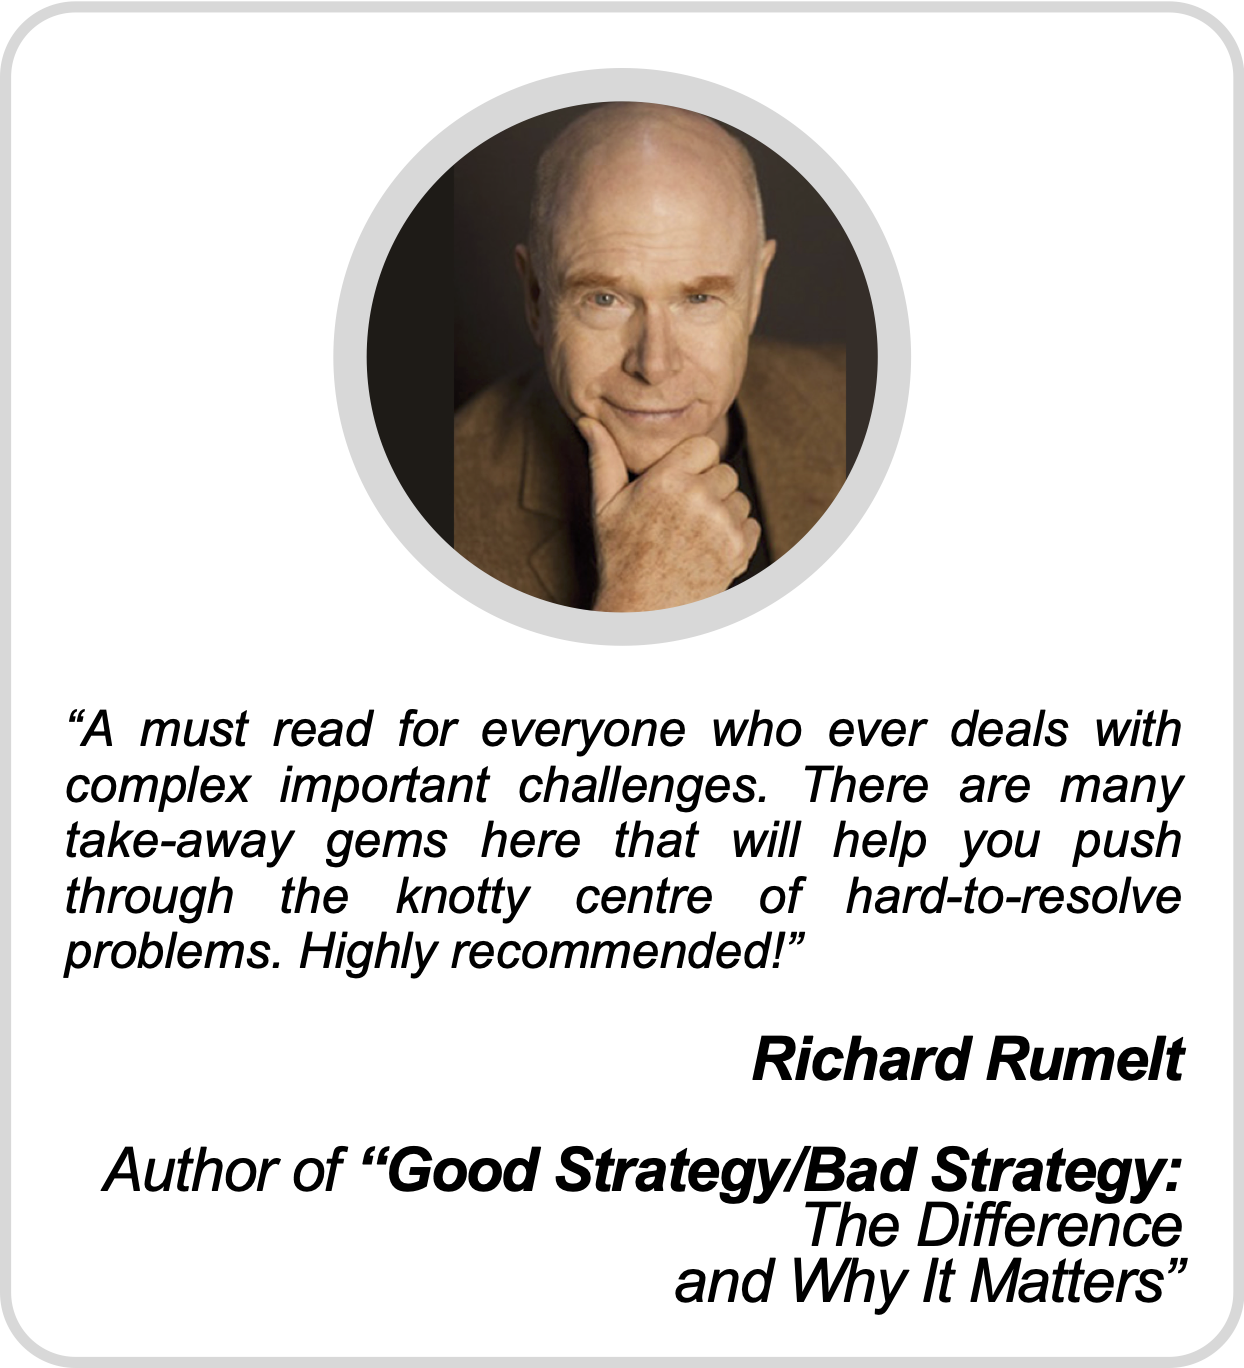 Quote - Richard Rumelt.png